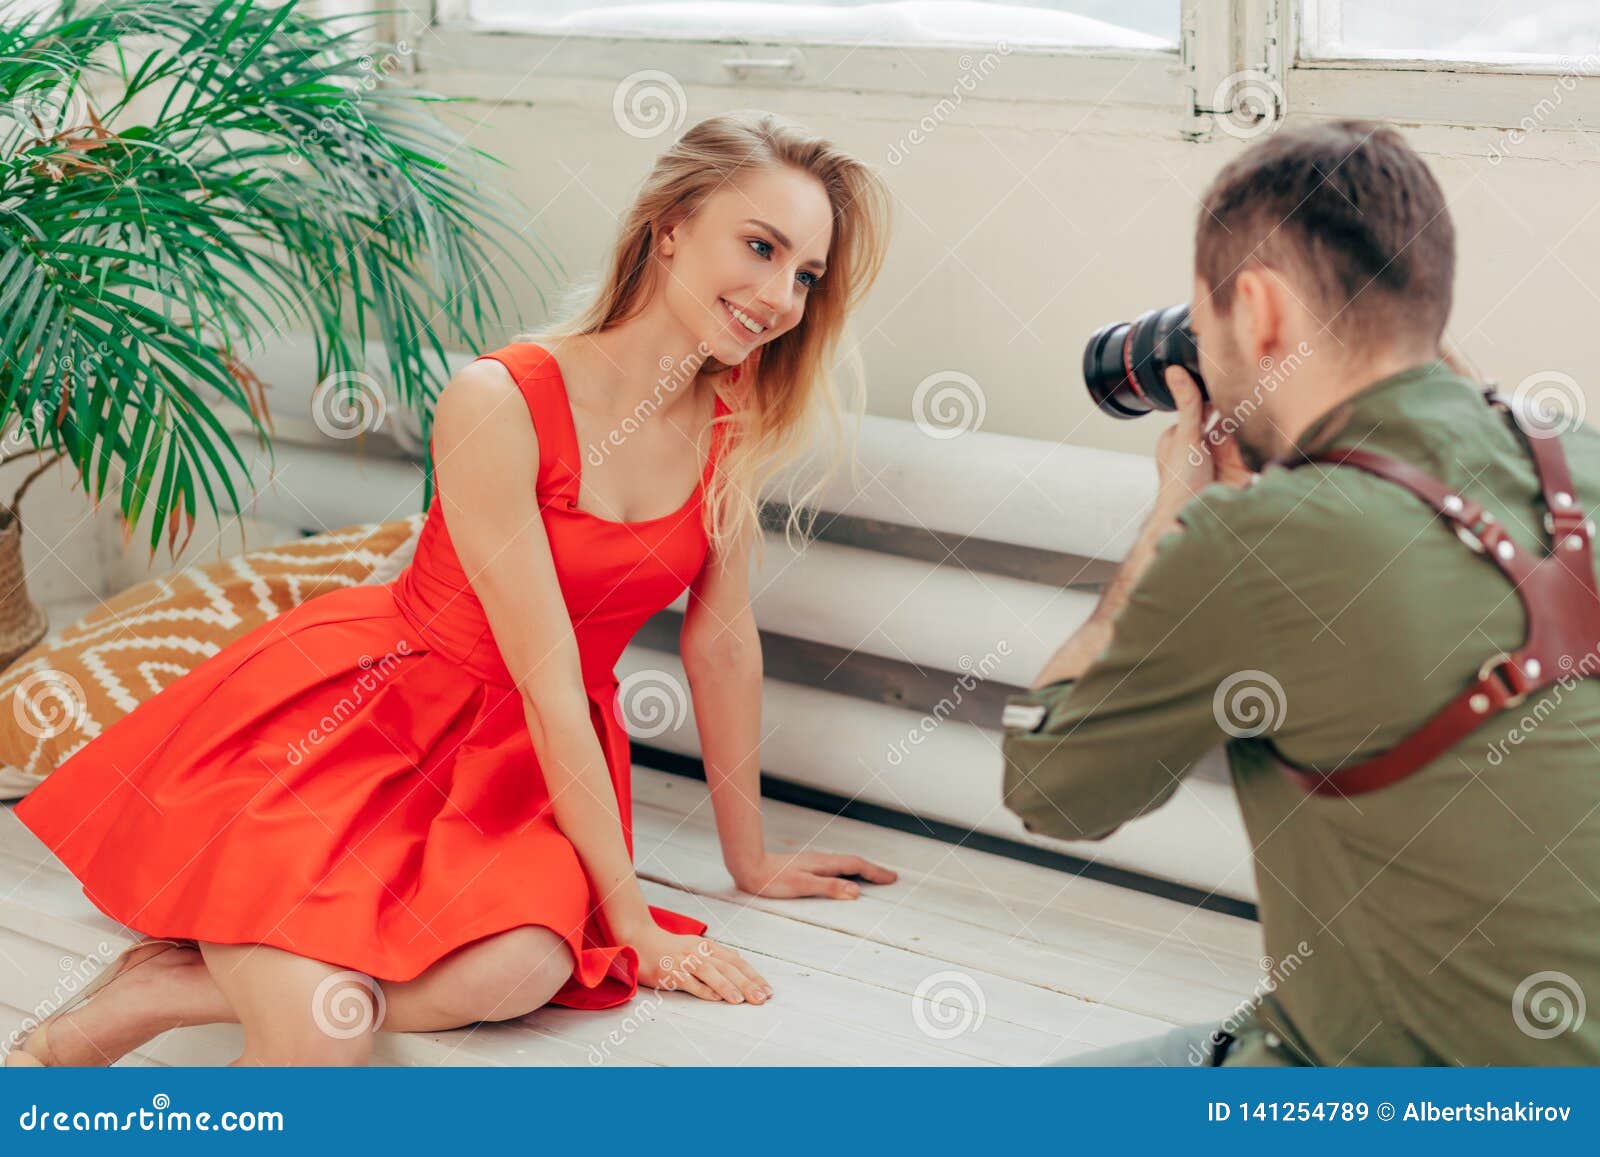 Happy Stylish Romantic Girl Getting Pleasure From Photo Session St photo image